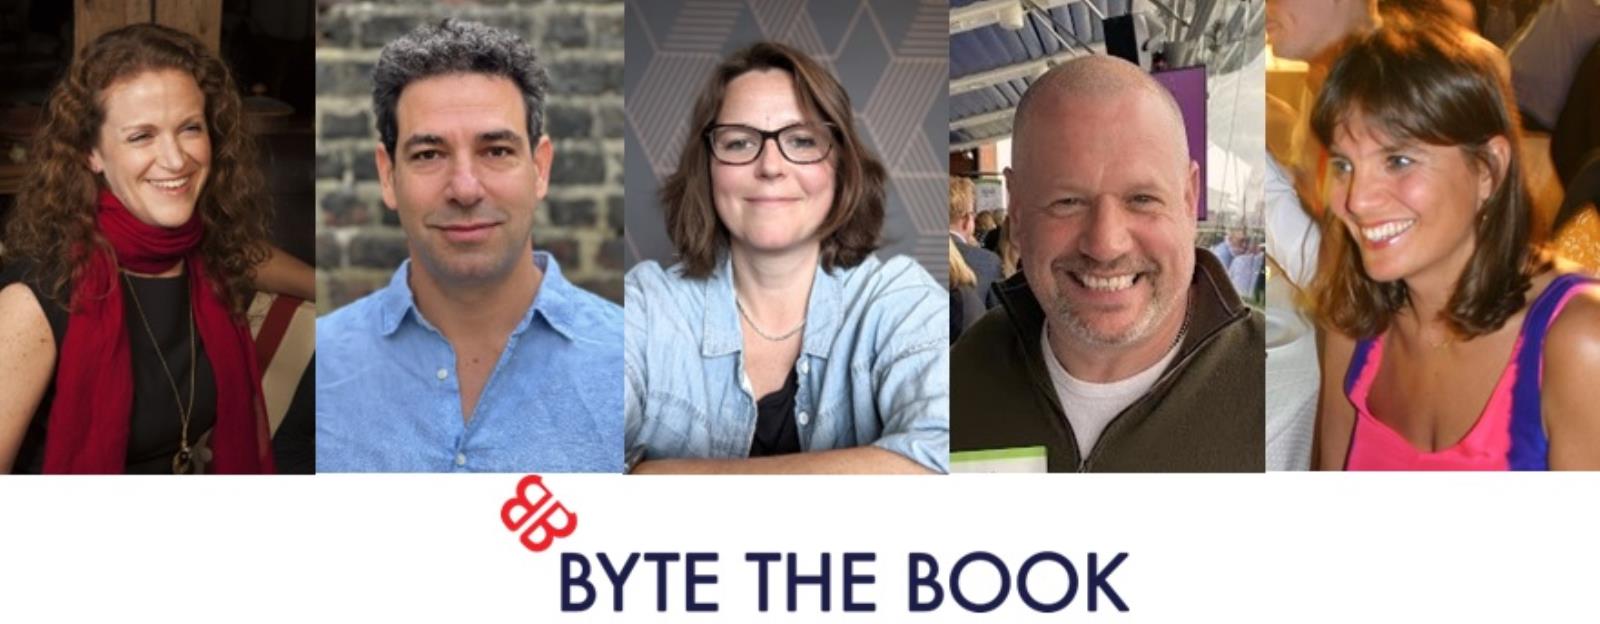 DMG Roundtable 2022: 'Bookselling in 2022: New Routes to Market' - 31 Oct